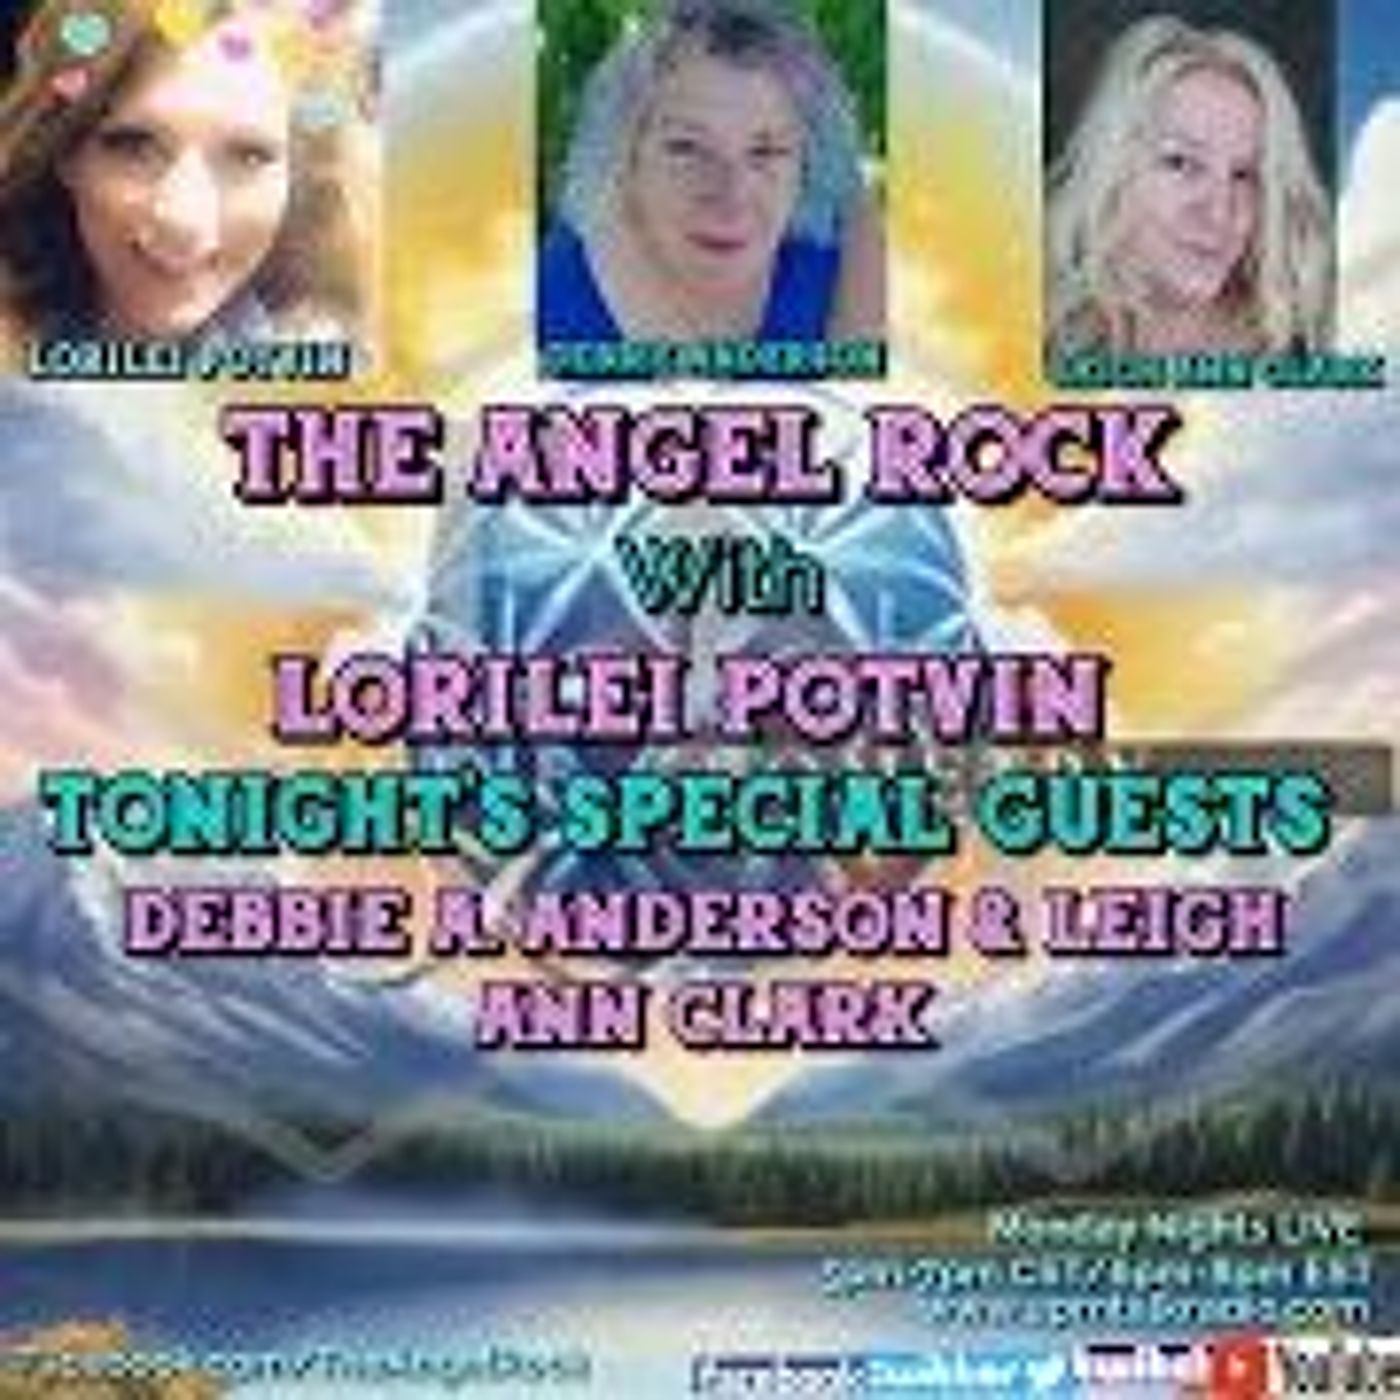 The Angel Rock With Lorilei Potvin & Guests Debbie A. Anderson & Leigh Ann Clark